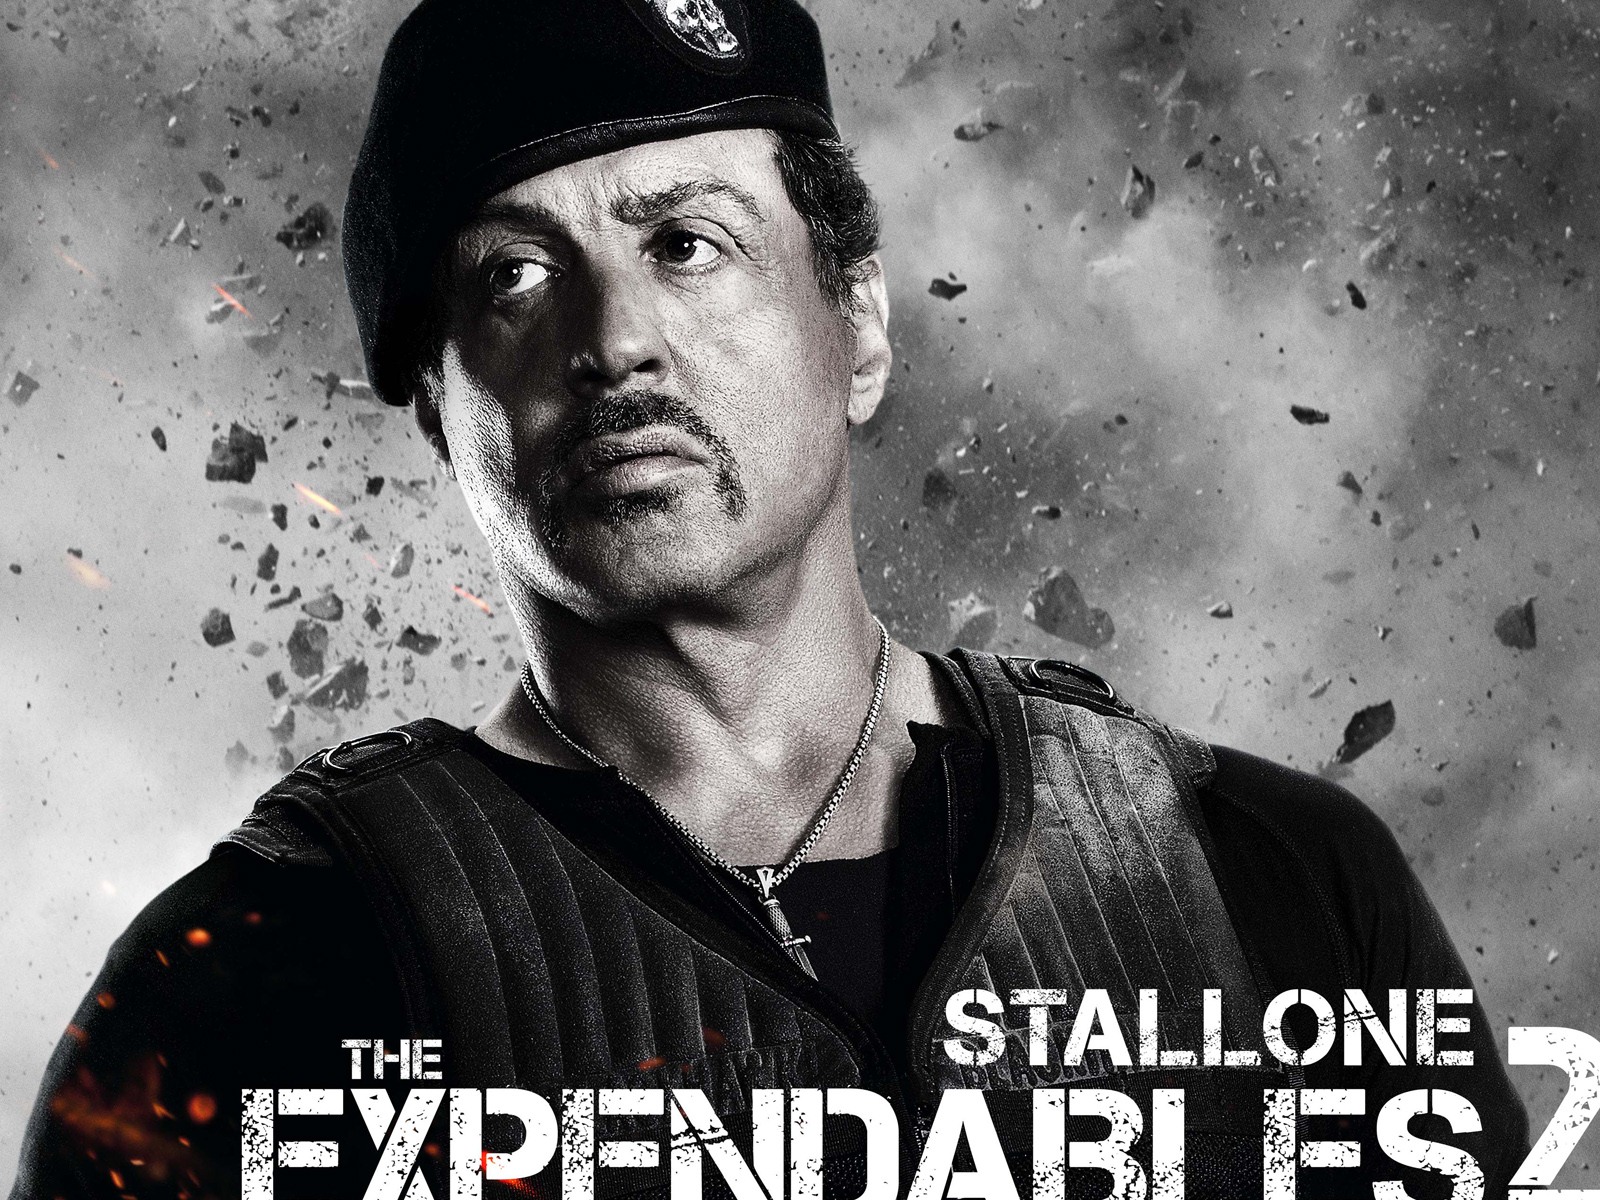 2012 Expendables2 HDの壁紙 #9 - 1600x1200